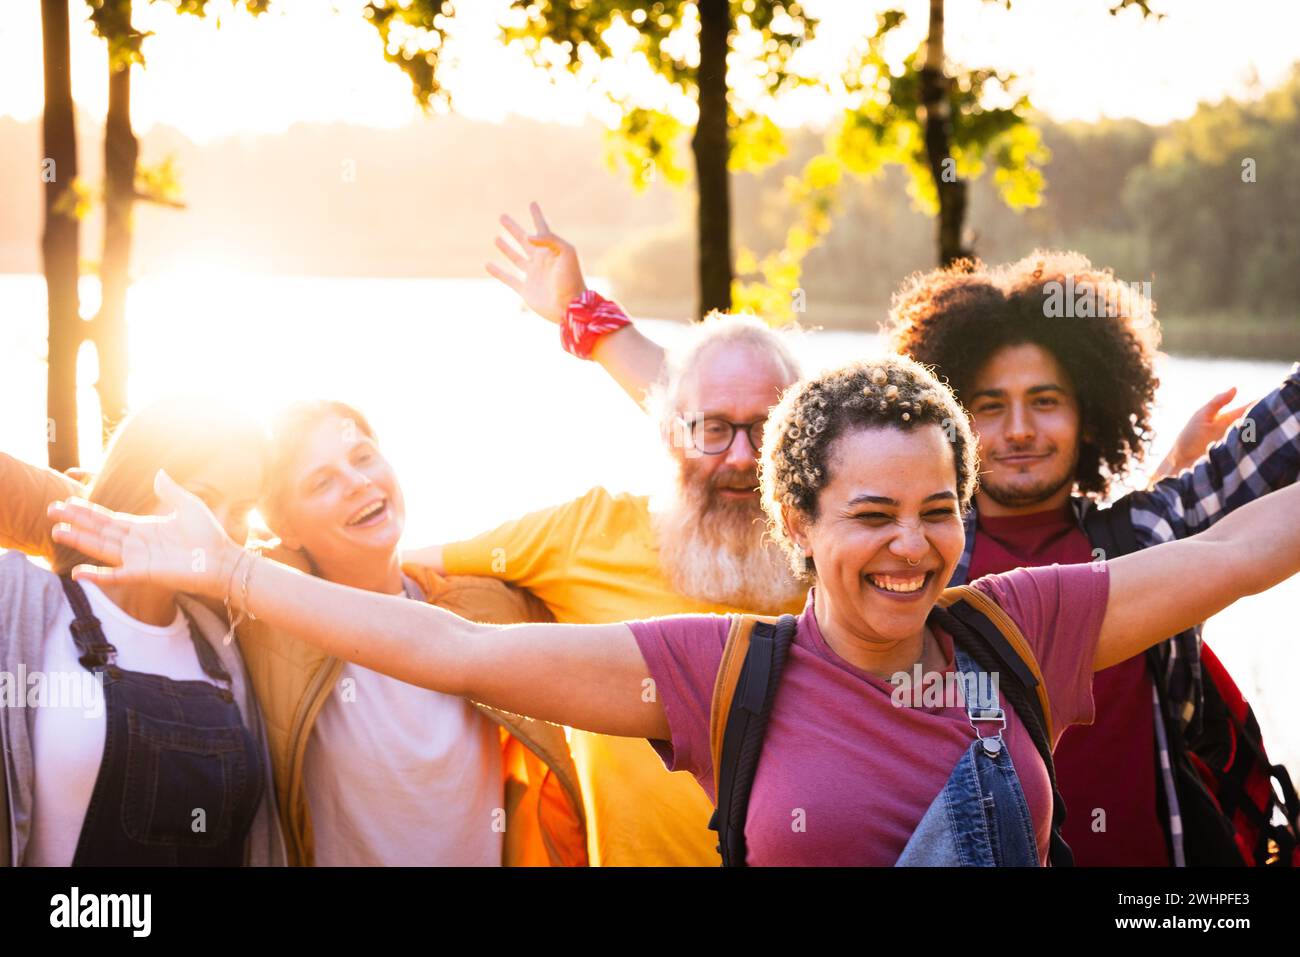 Summer Joy by the Lakeside: Multiracial Friends Unite Stock Photo